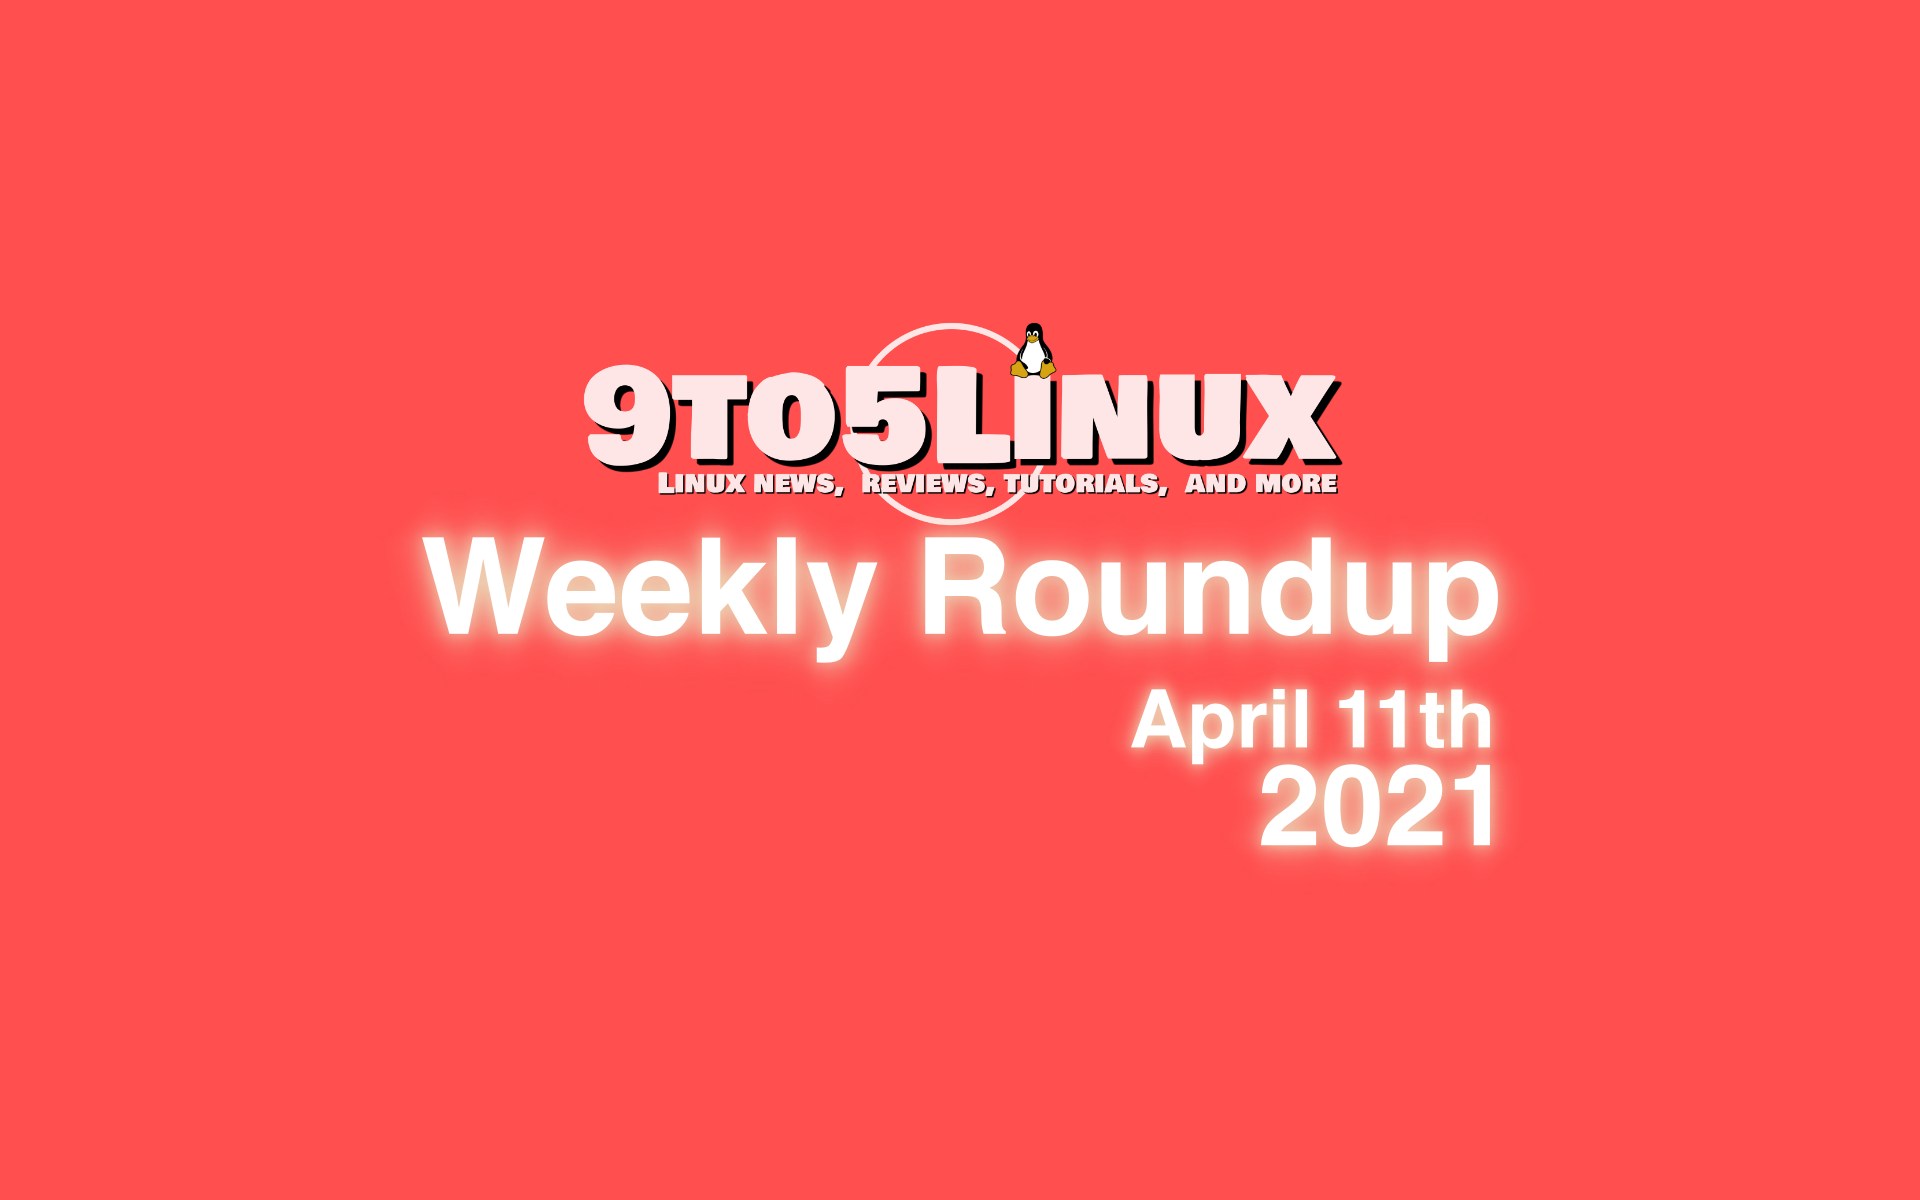 9to5Linux Weekly Roundup: April 11th, 2021